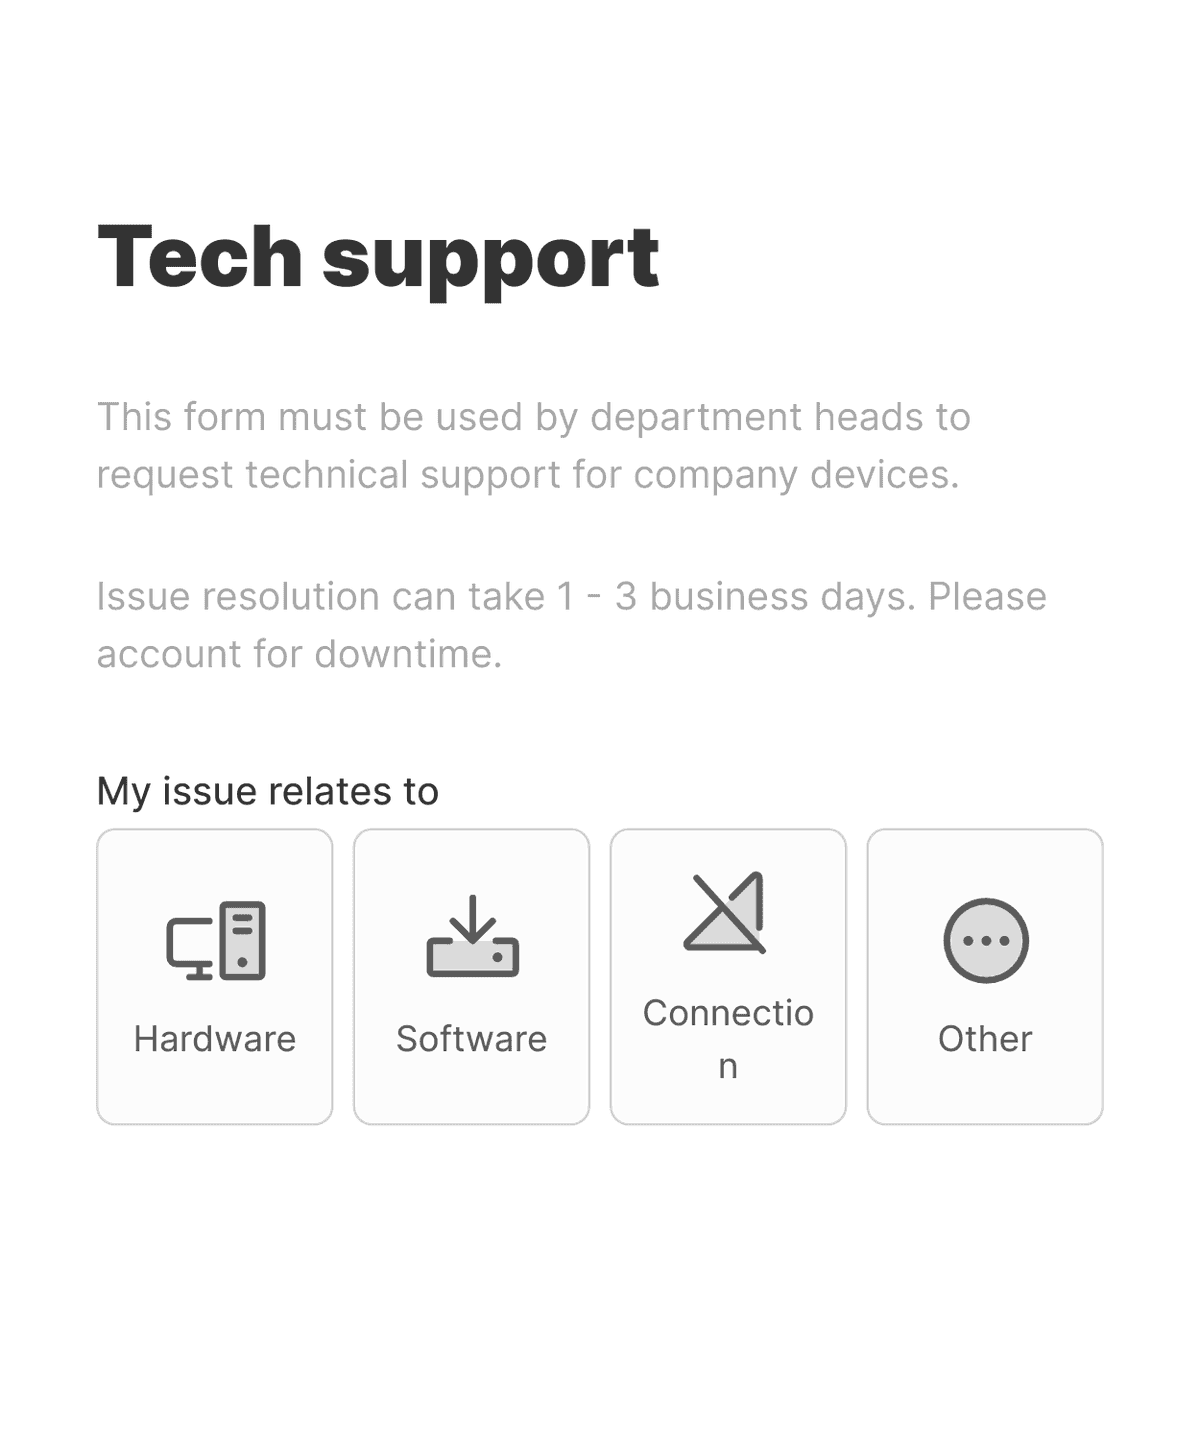 'Technical support requisition' form with various input fields and a submit button